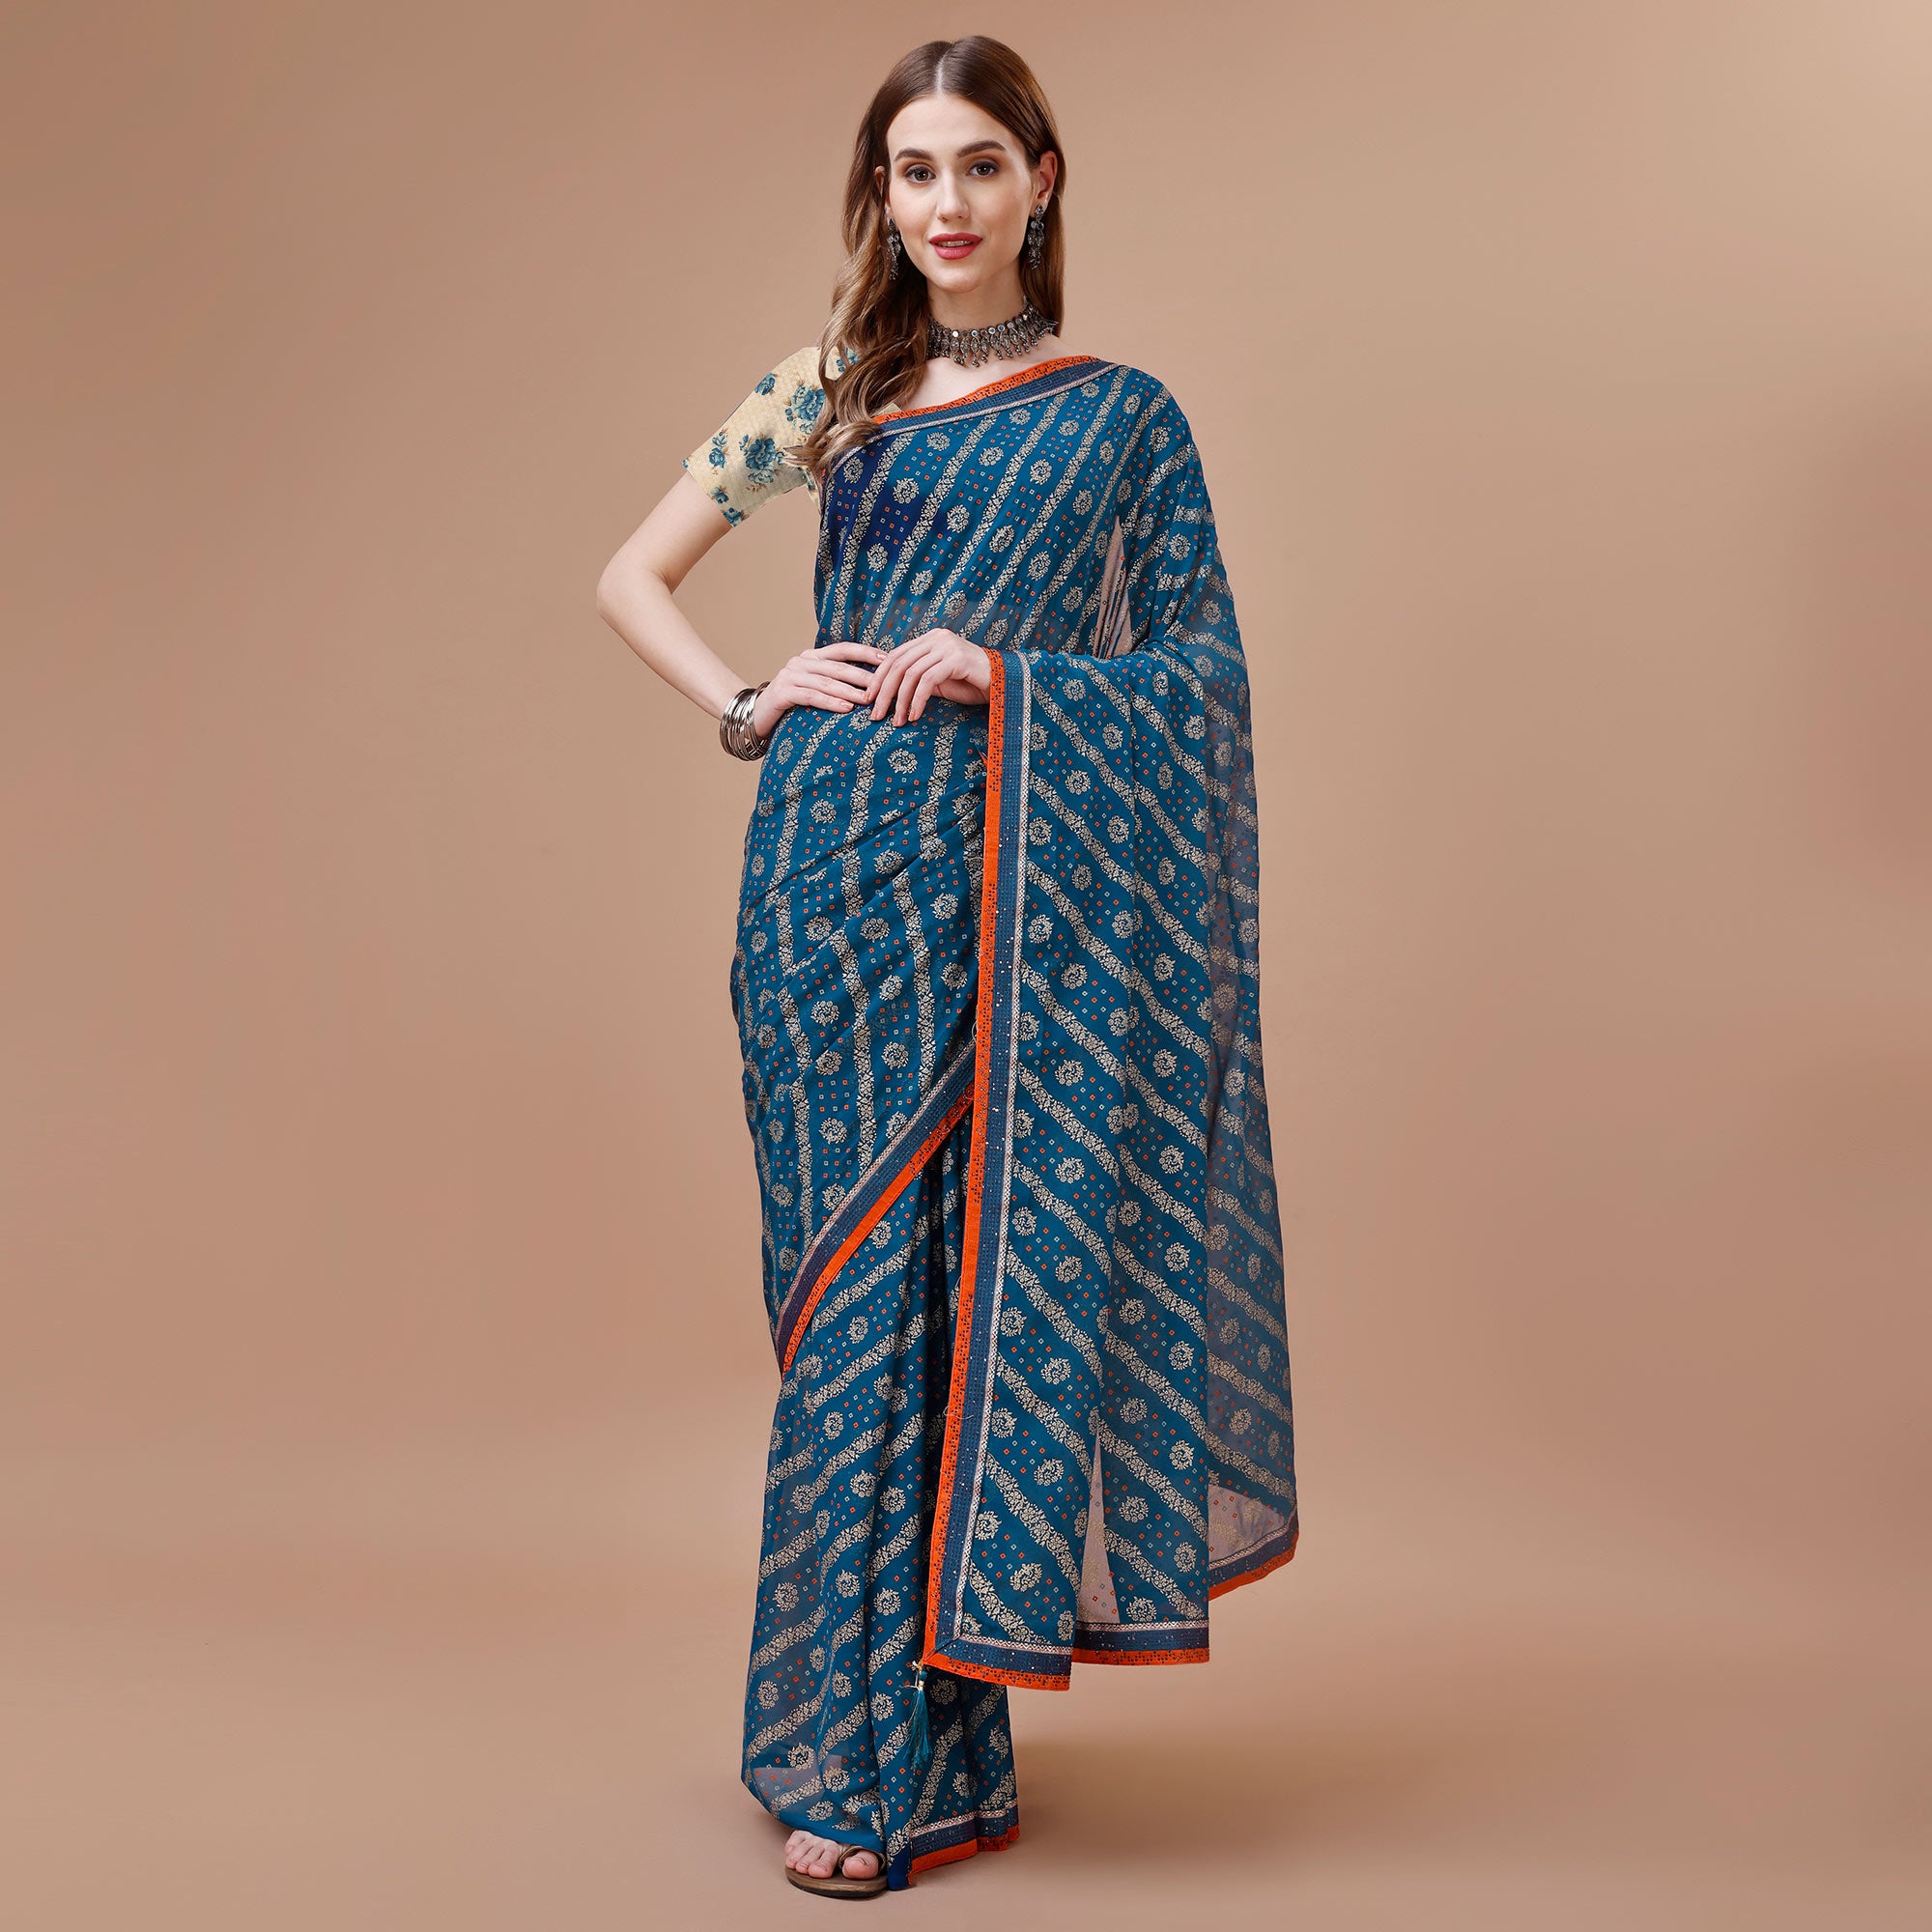 Blue Floral Foil Printed Chiffon Saree With Lace Border